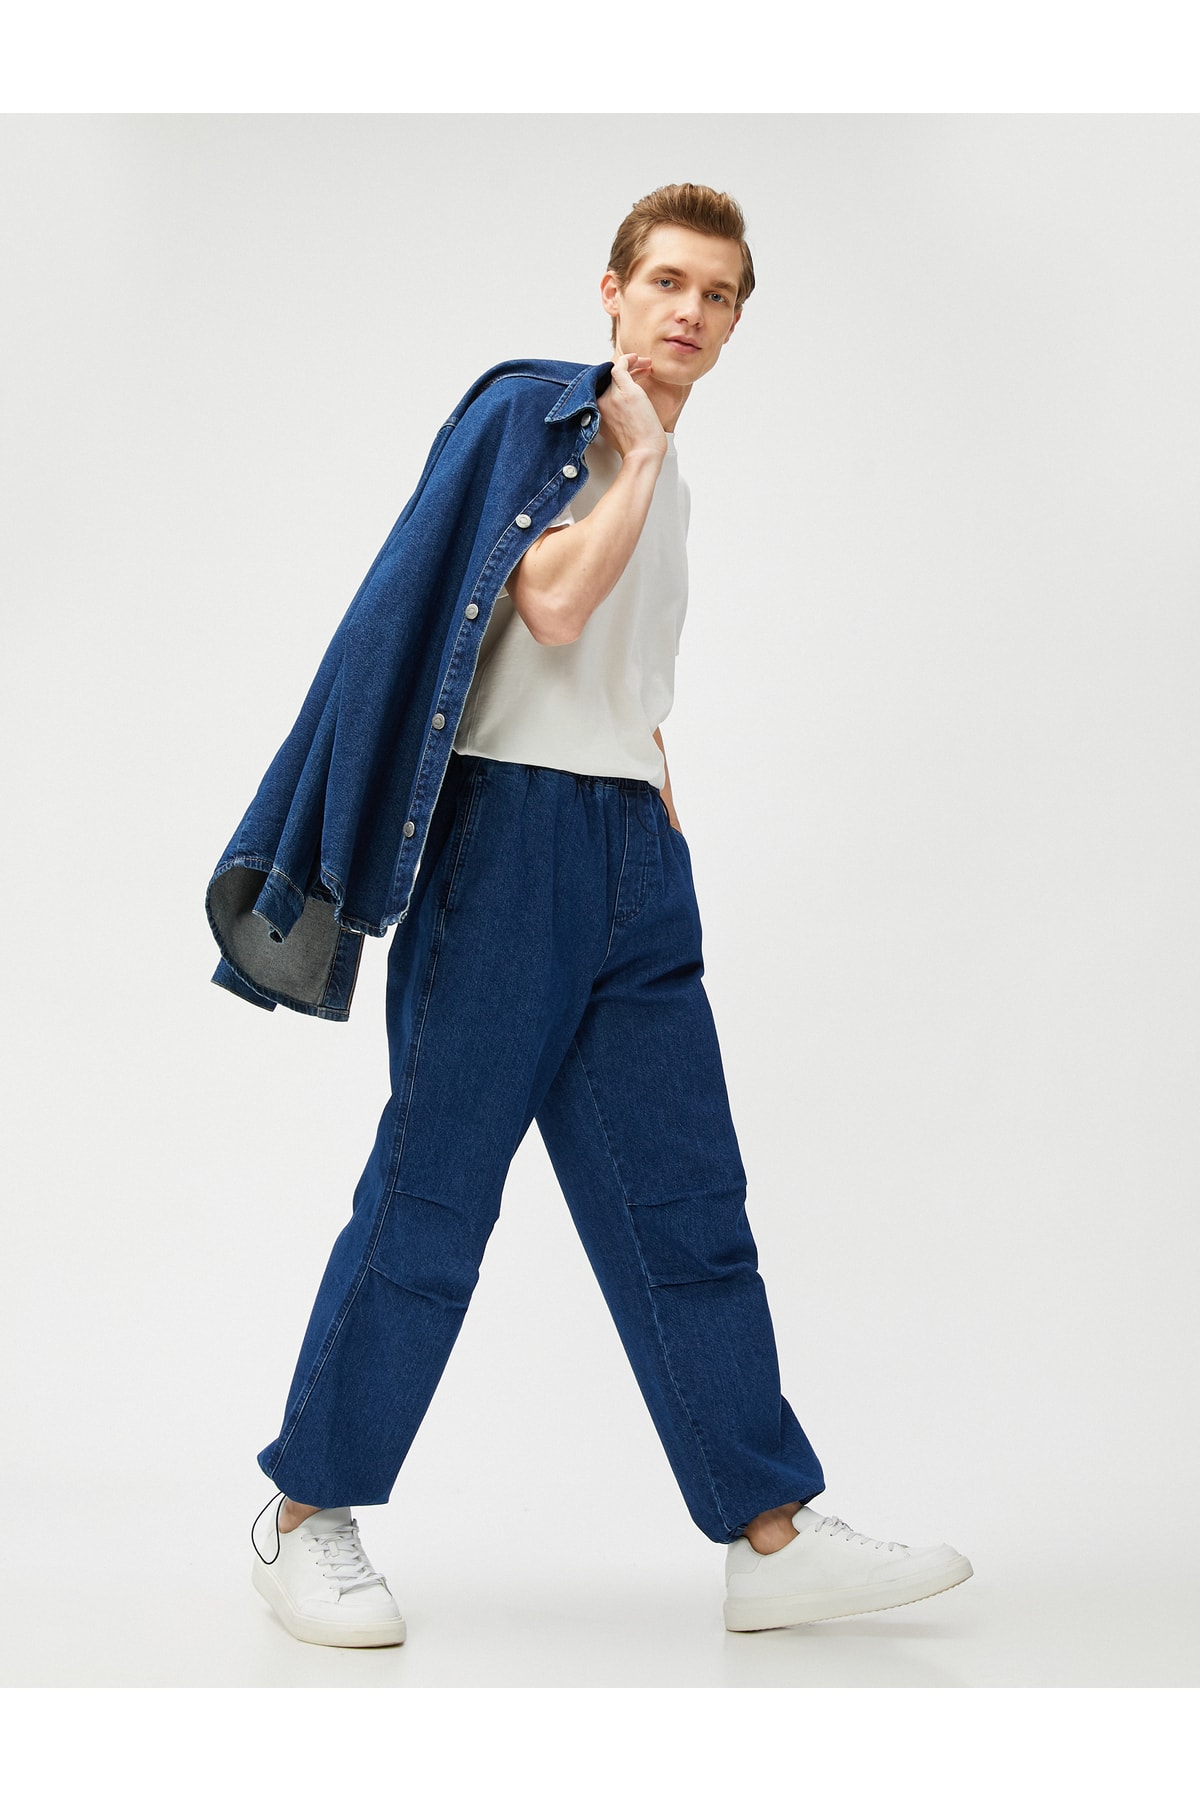 Levně Koton Jeans Parachute Trousers, Wide Cut, with Pocket Detailed Waist and Legs with Stoppers, Cotton.